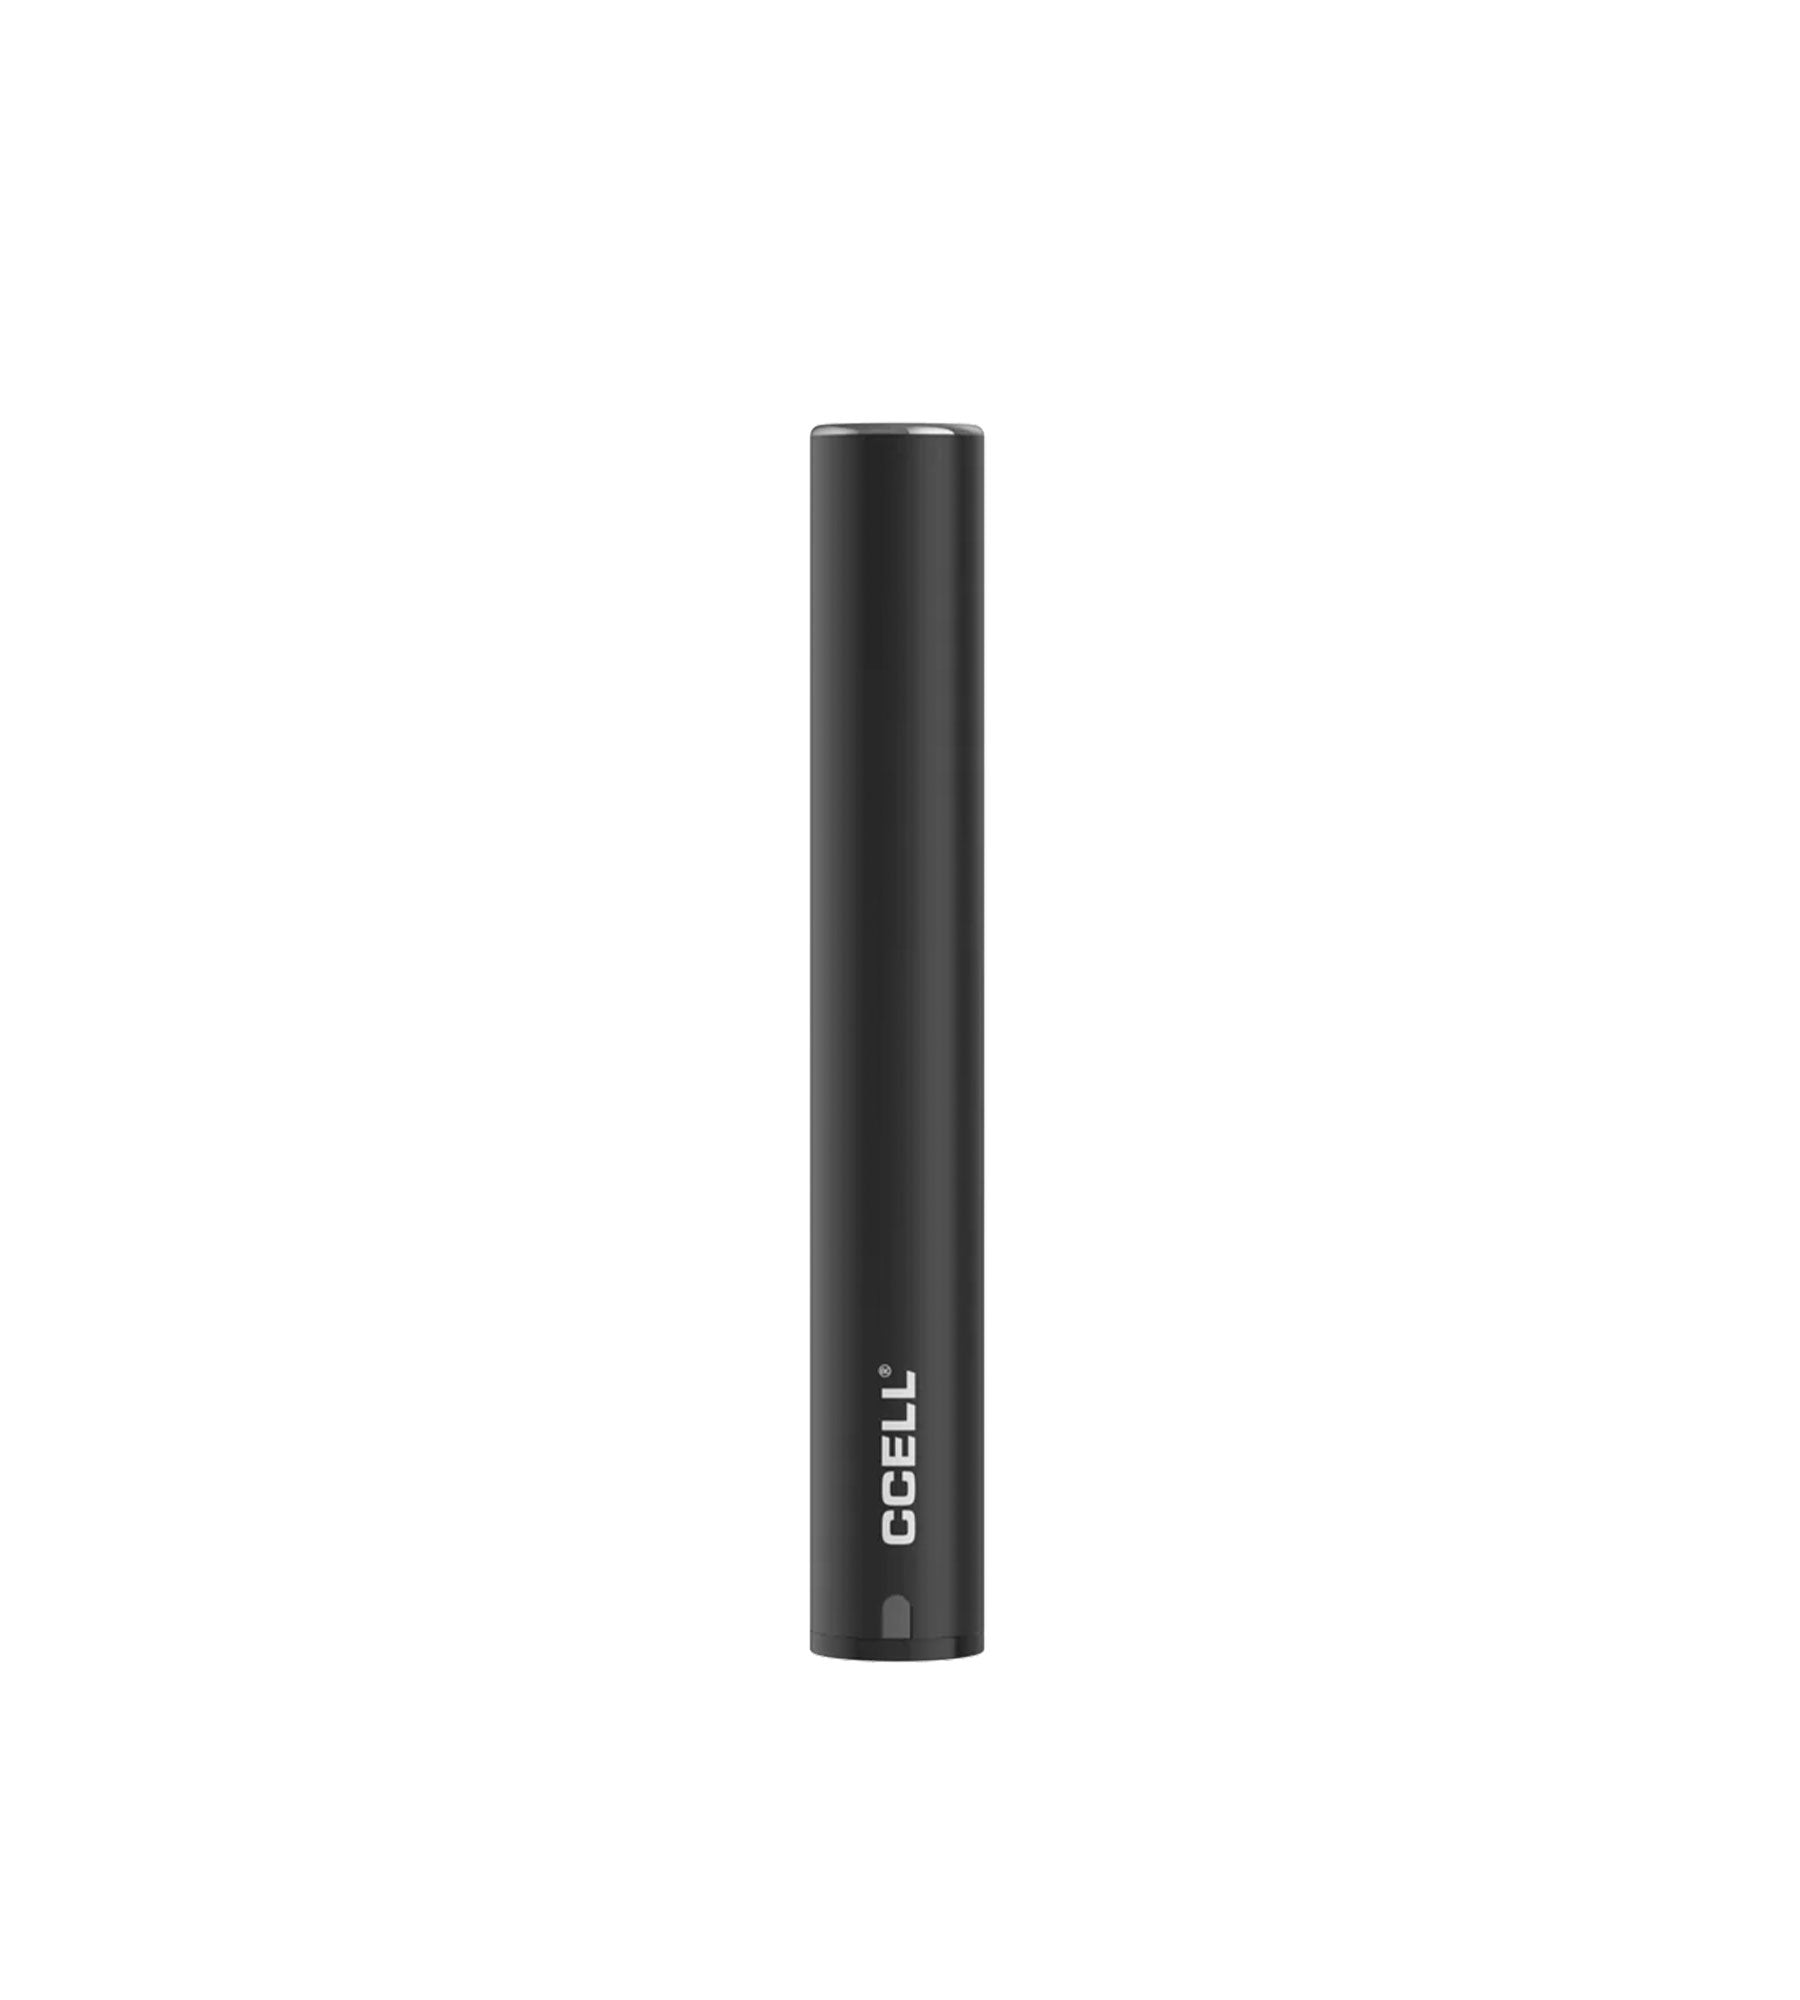 CCELL M3 Plus Black Battery